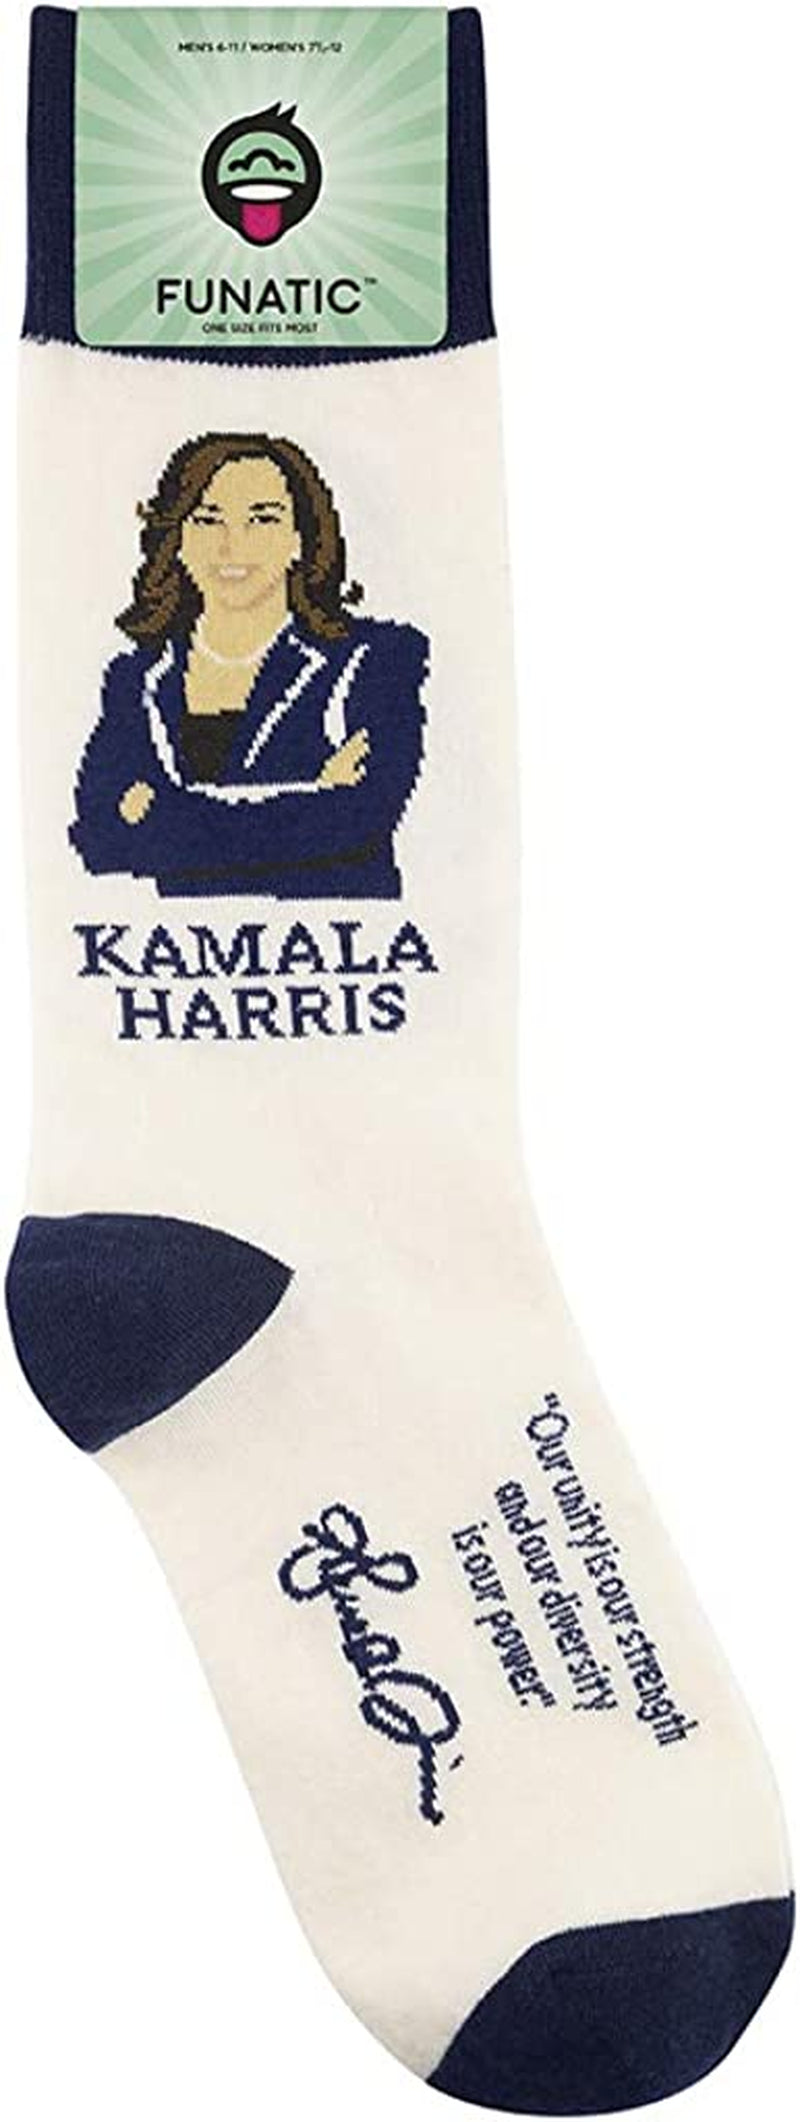 President and History Quote Socks - Gifts for Men, Women, Teens - Trump, Biden, Fauci, Obama, Bush, RBG, Harris, Clinton Sporting Goods > Outdoor Recreation > Winter Sports & Activities FUNATIC   